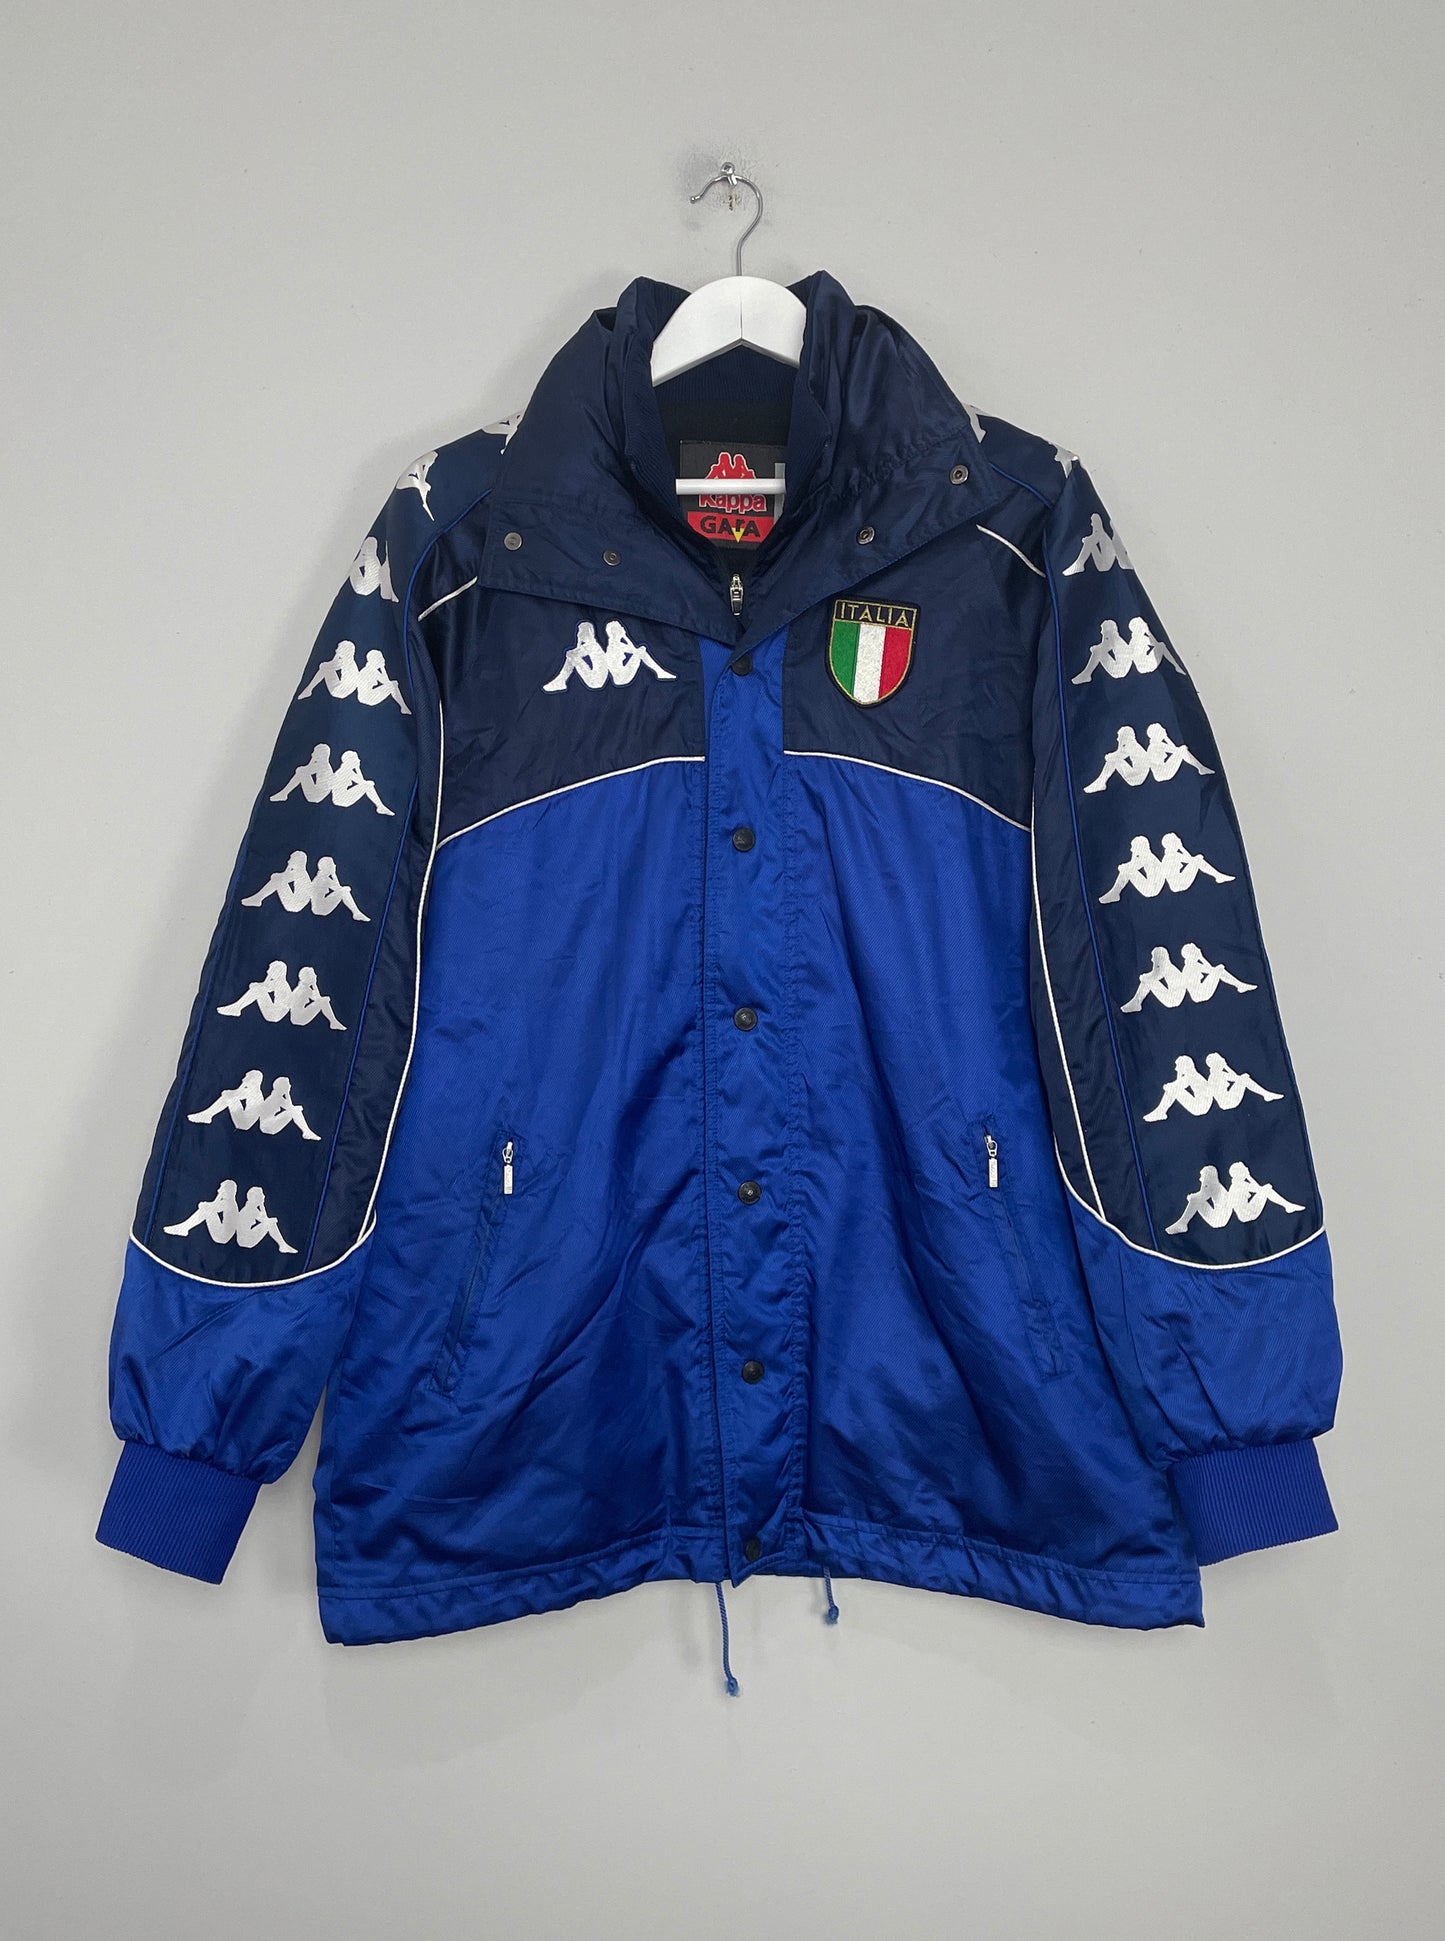 Image of the Italy jacket from the 1999/00 season